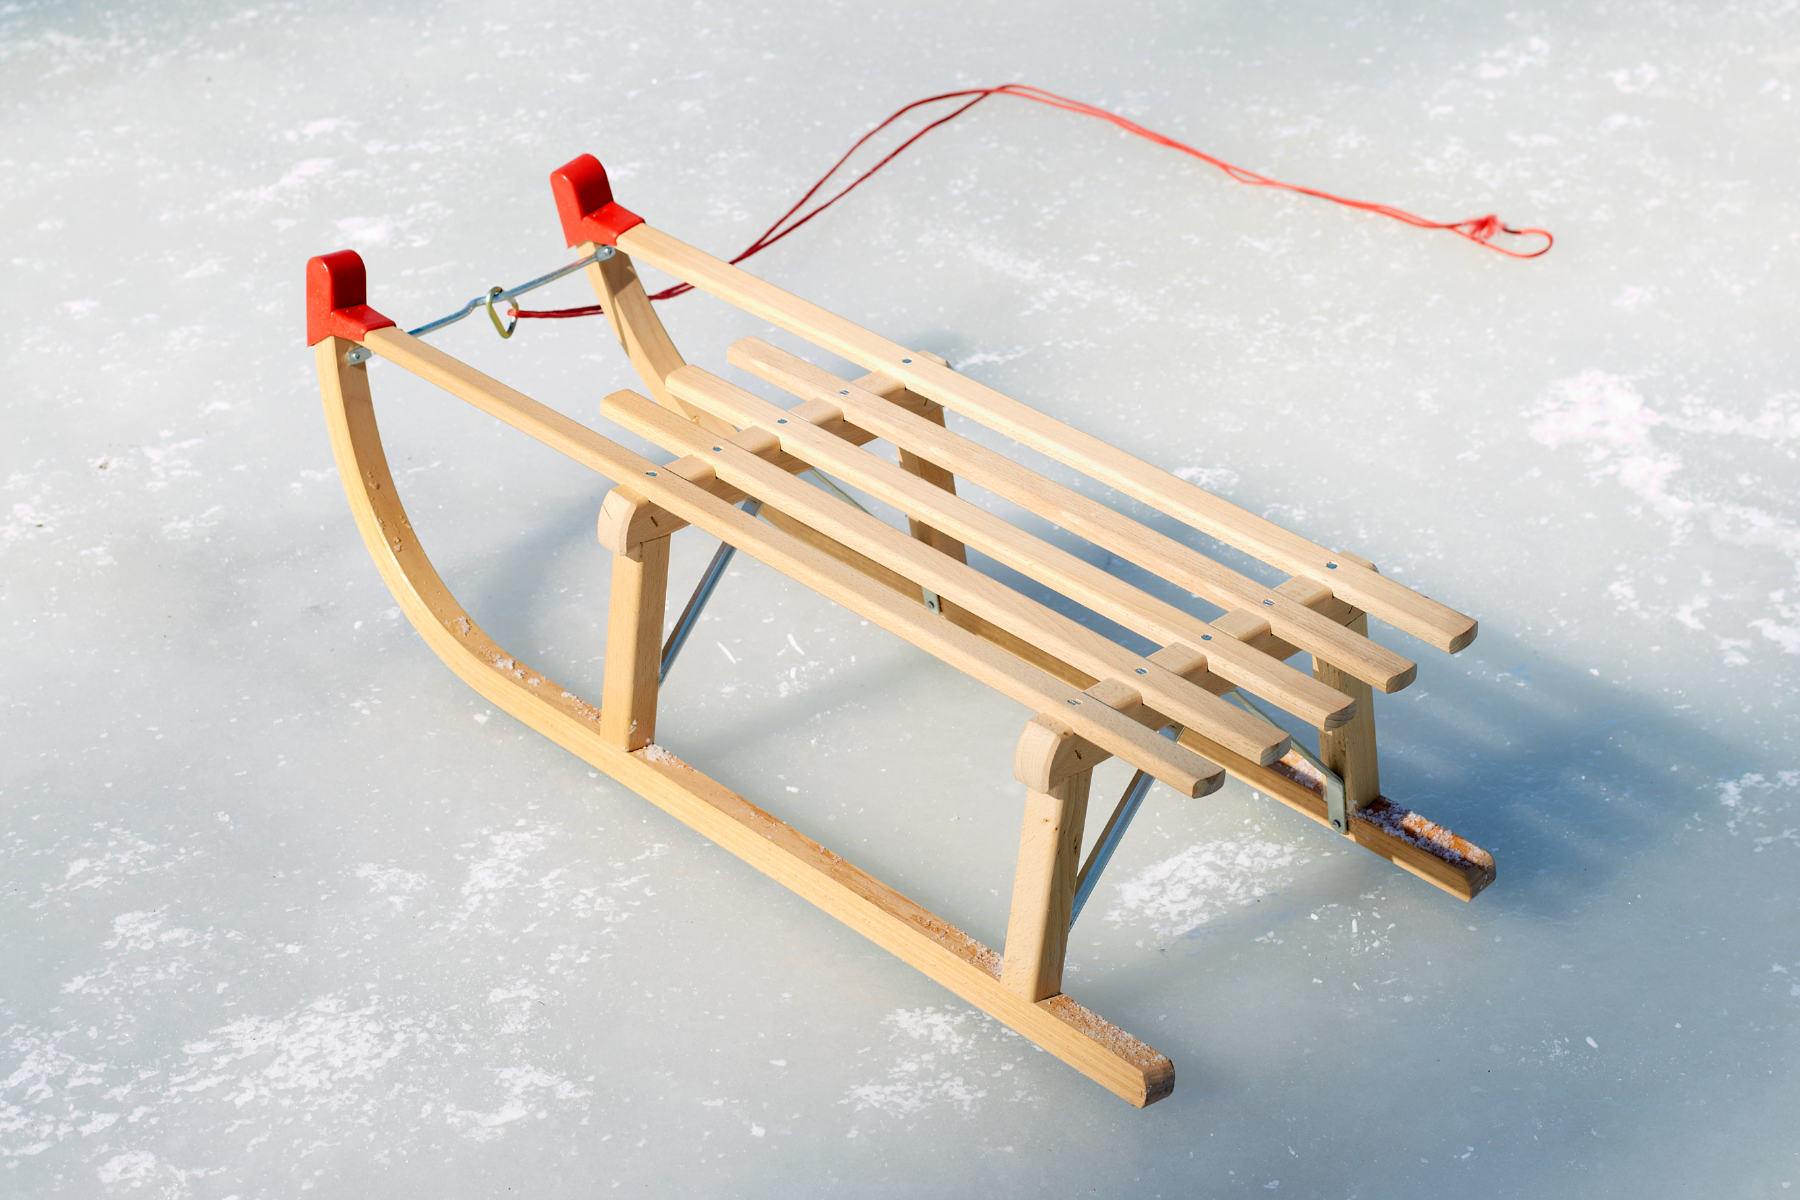 A wooden sledge on the ground